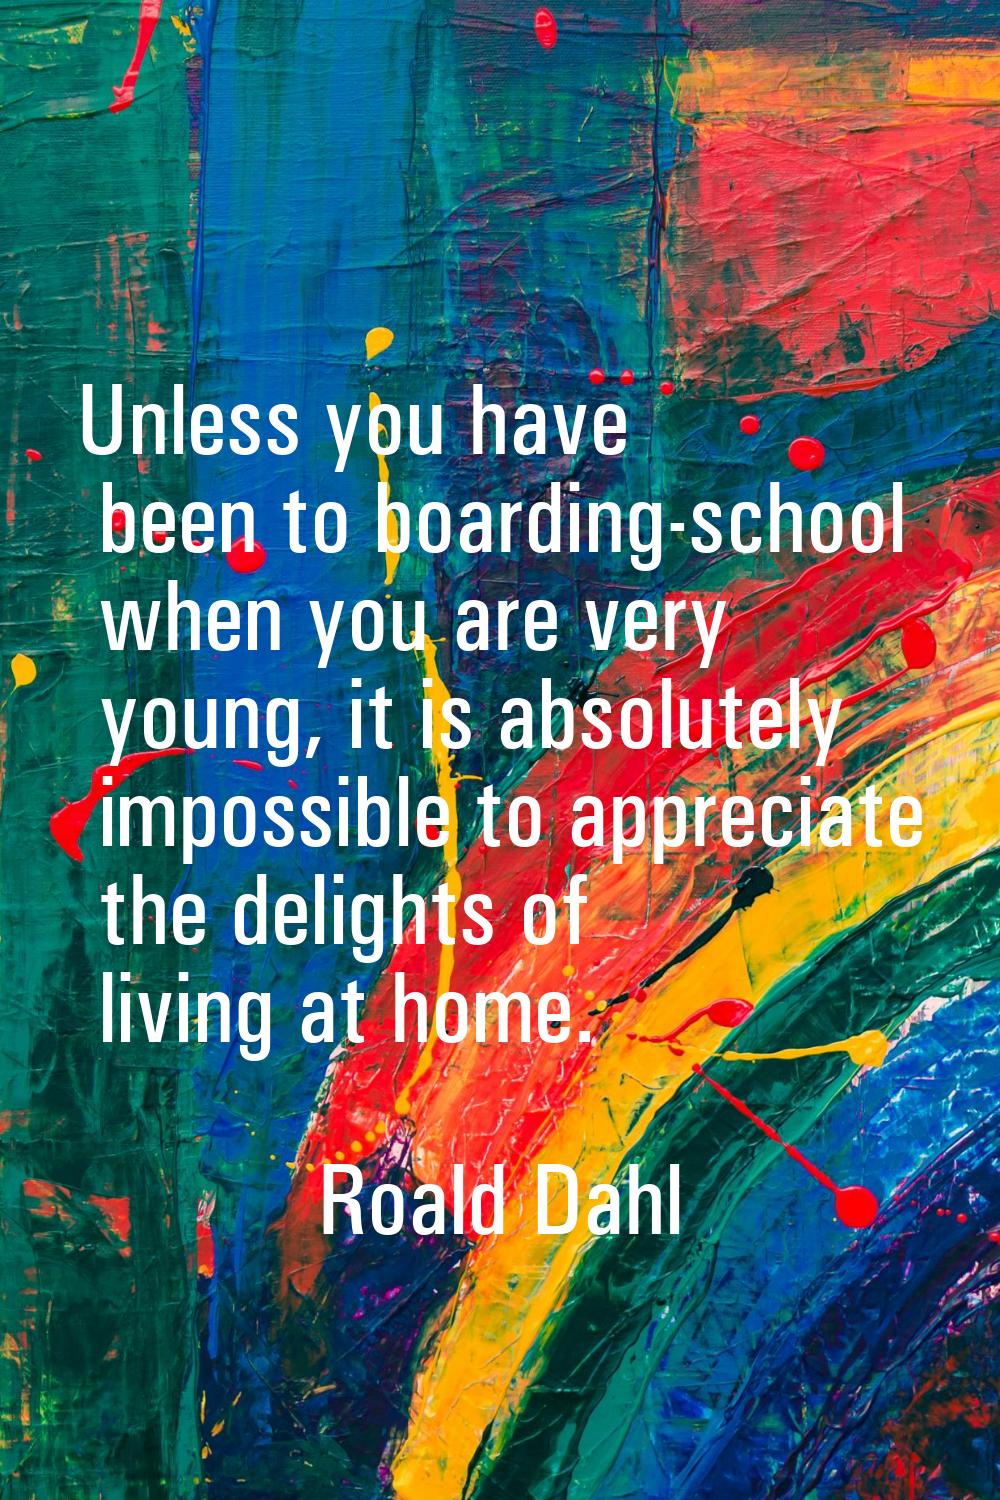 Unless you have been to boarding-school when you are very young, it is absolutely impossible to app